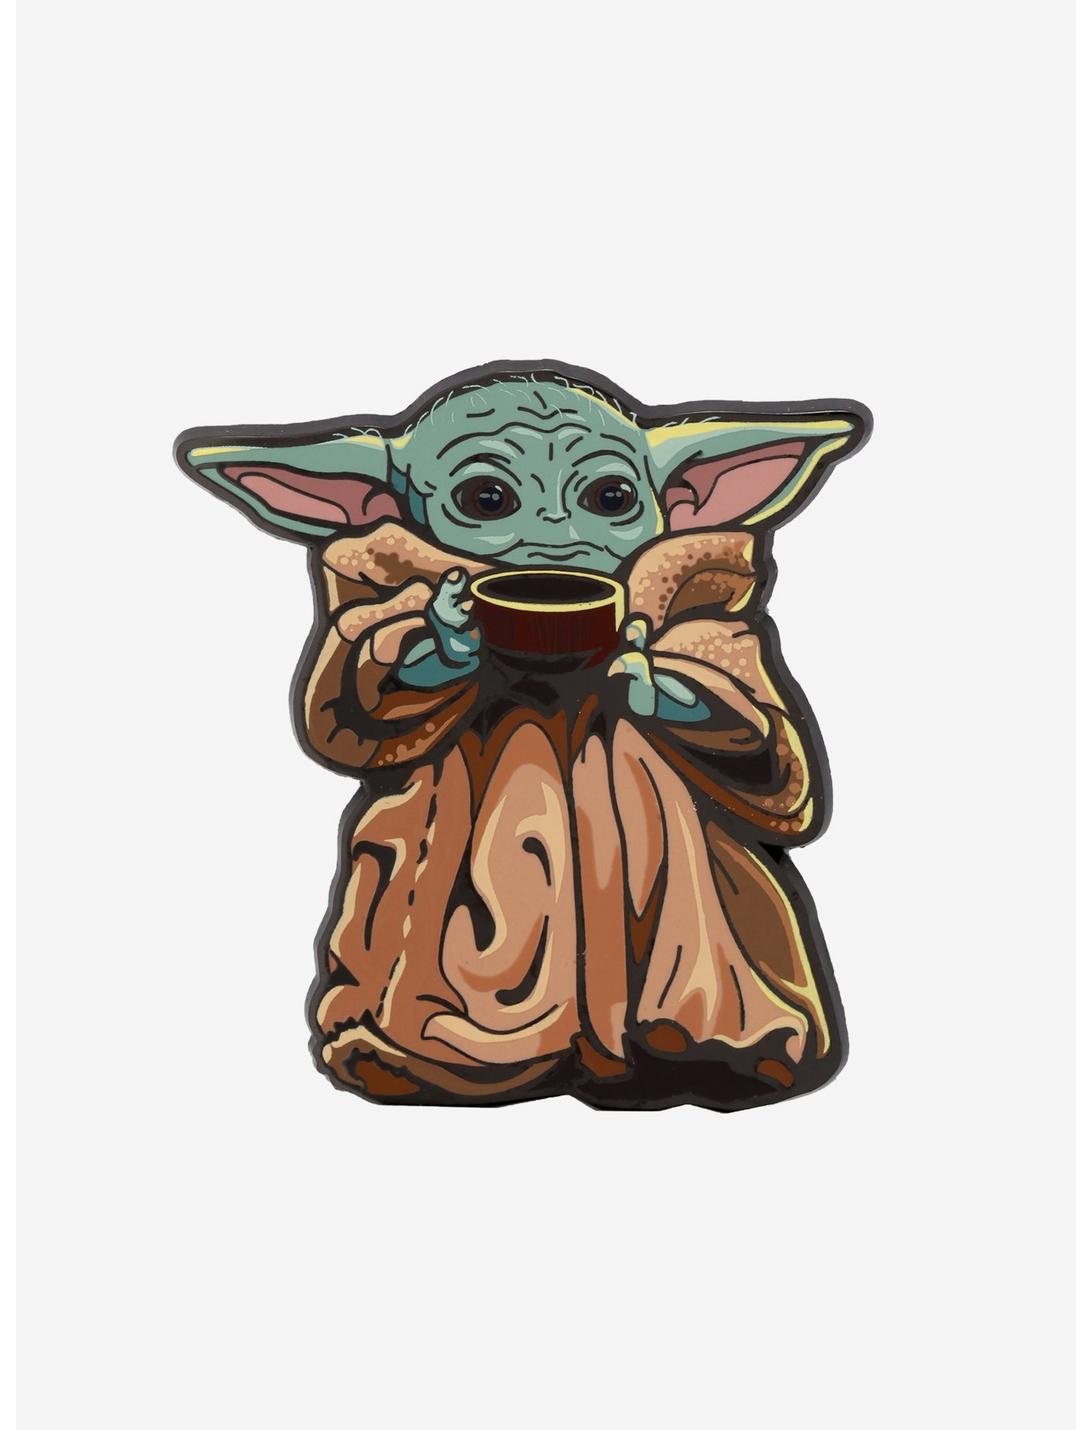 FiGPiN Star Wars The Mandalorian The Child (With Cup) Collectible Enamel Pin, , hi-res